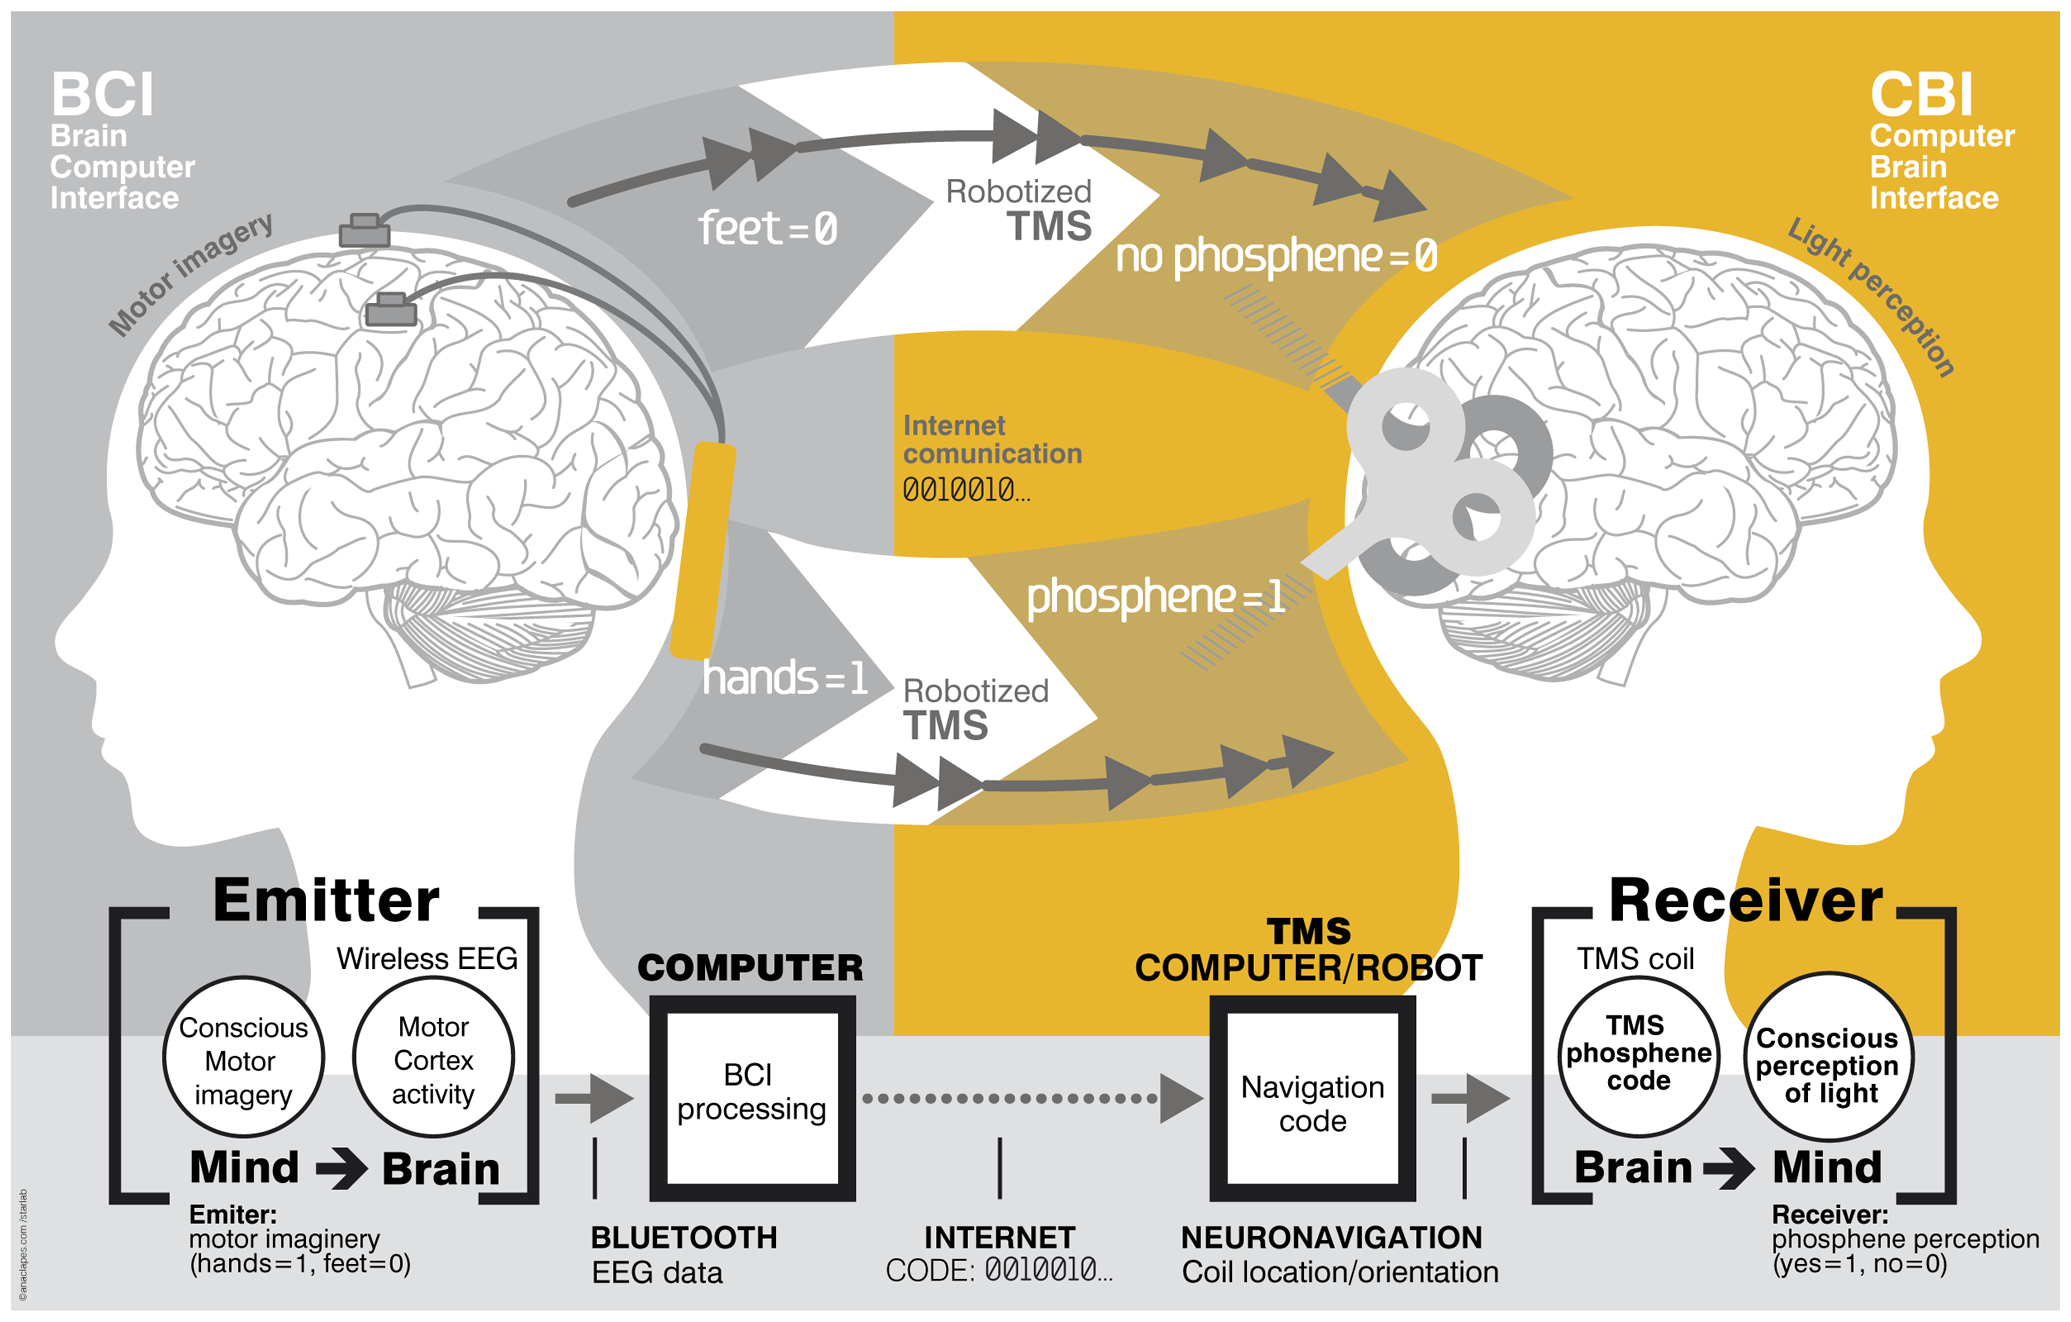 Brain-to-brain (B2B) communication system overview. On the left, the BCI subsystem is shown schematically, including electrodes over the motor cortex and the EEG amplifier/transmitter wireless box in the cap. Motor imagery of the feet codes the bit value 0, of the hands codes bit value 1. On the right, the CBI system is illustrated, highlighting the role of coil orientation for encoding the two bit values. Communication between the BCI and CBI components is mediated by the internet.